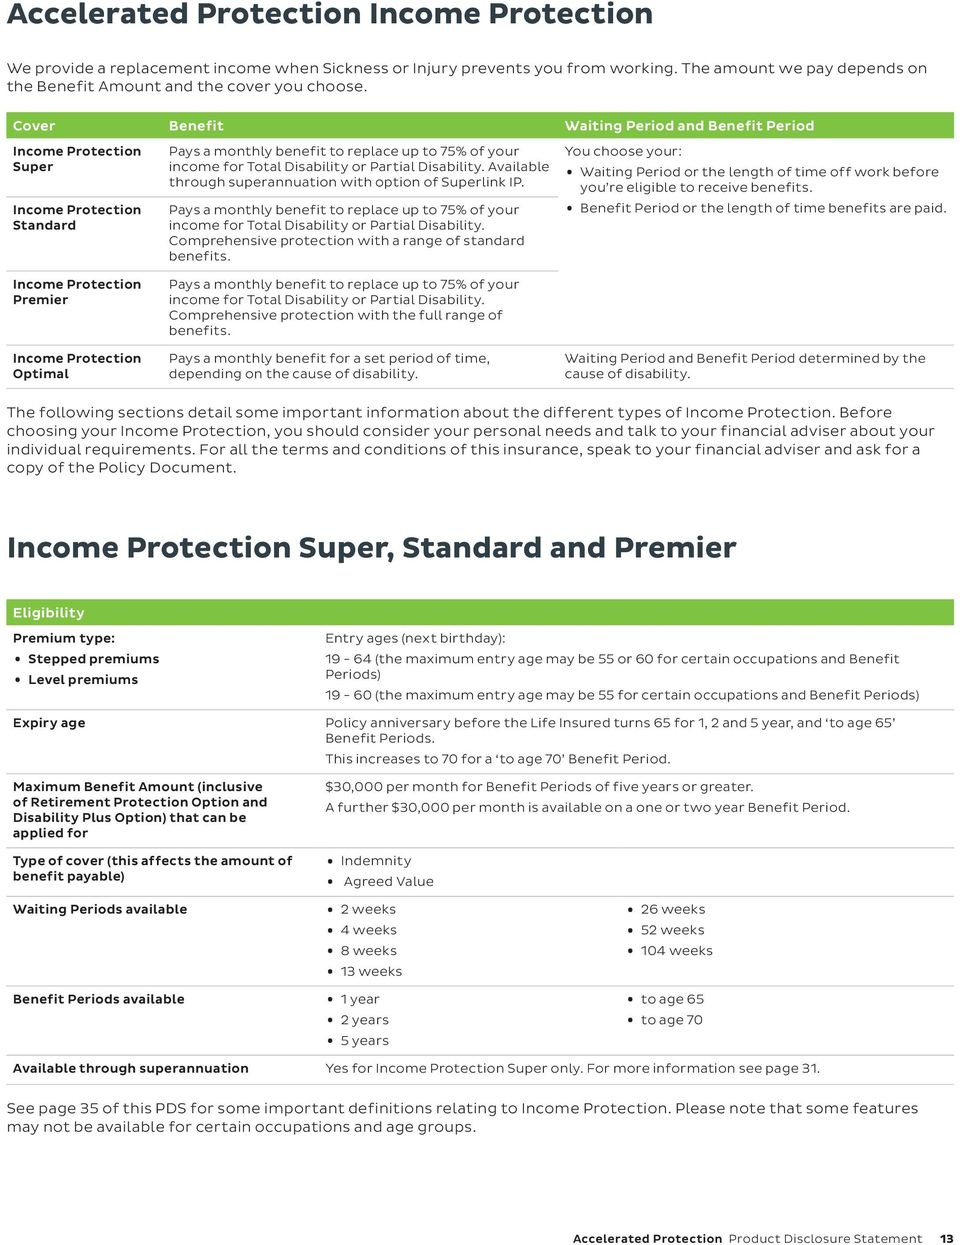 Total Disability or Partial Disability. Available through superannuation with option of Superlink IP.